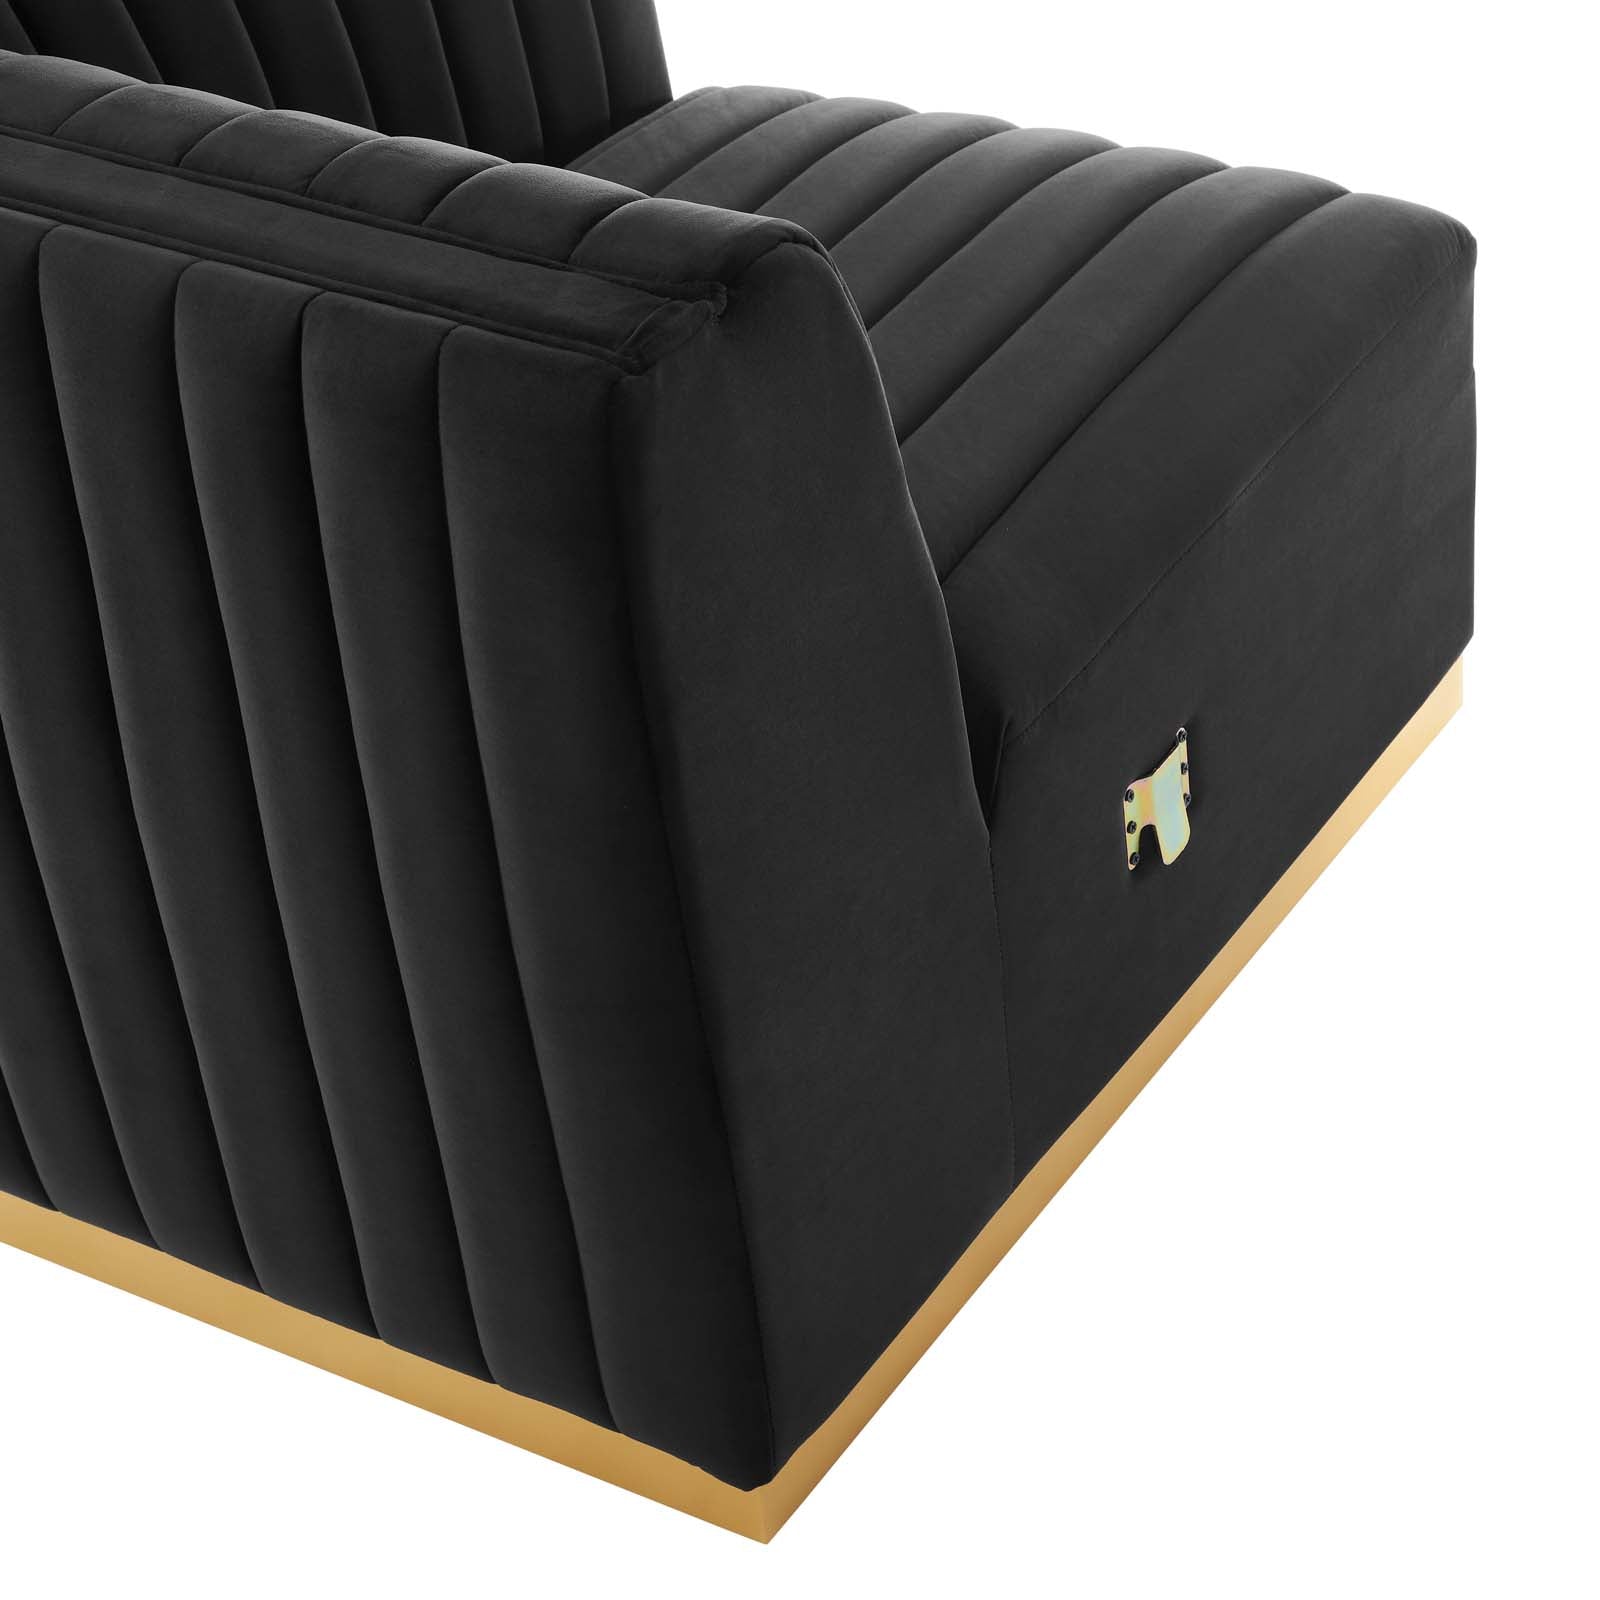 Modway Sectional Sofas - Conjure Channel Tufted Velvet 4 Piece Sectional Gold Black